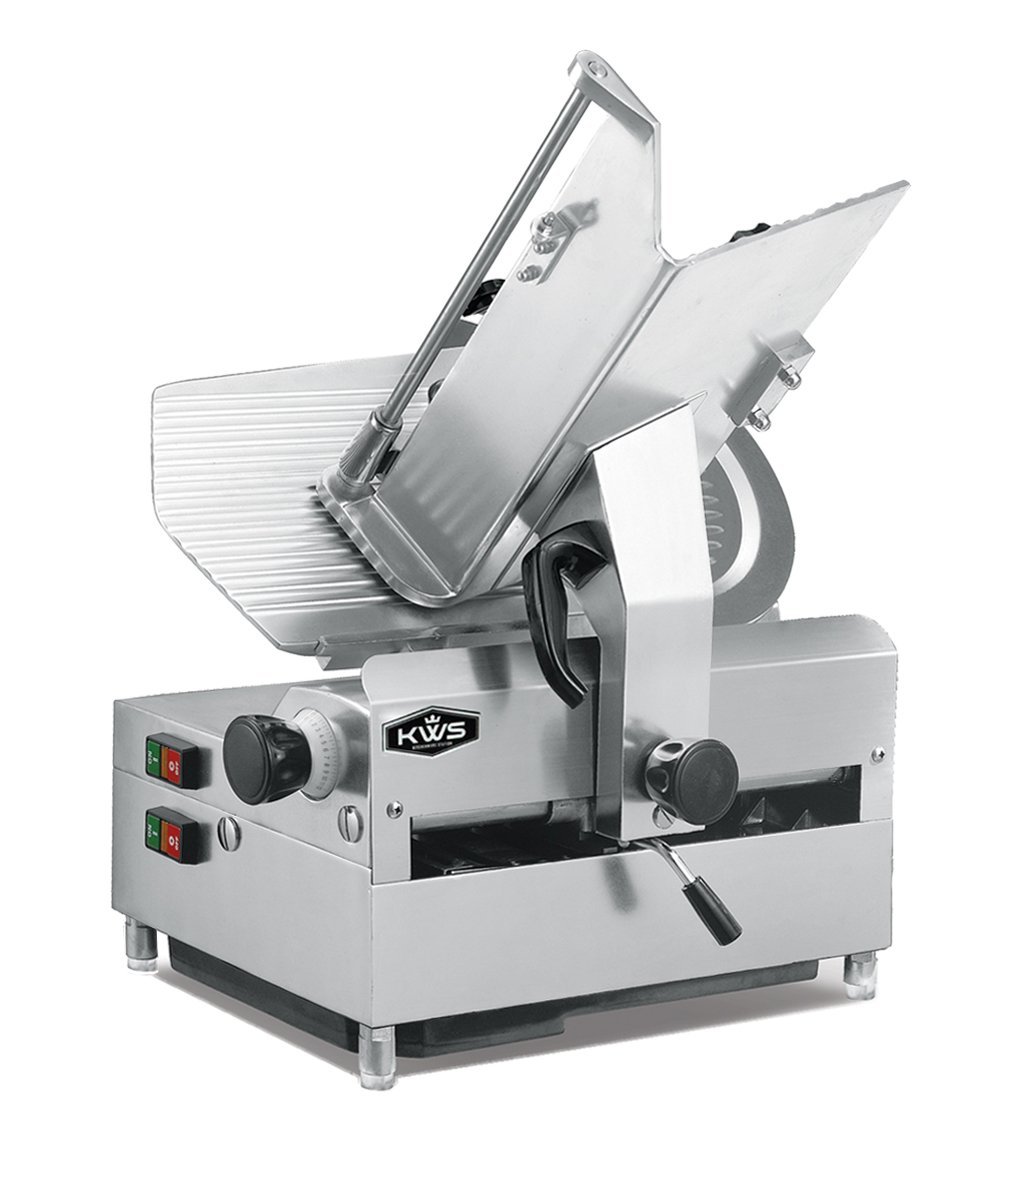 Commercial Electric Vegetable Chopper Cutting Machine Manufacturer